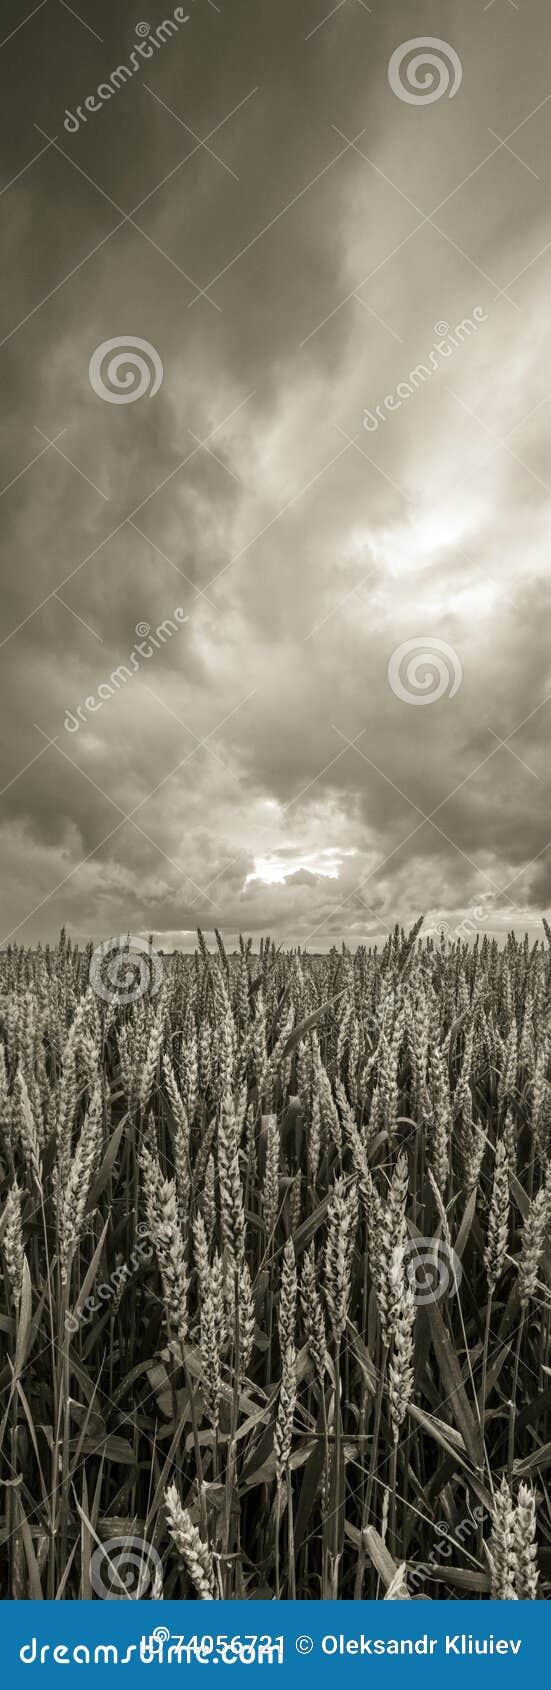 wheat field before the storm